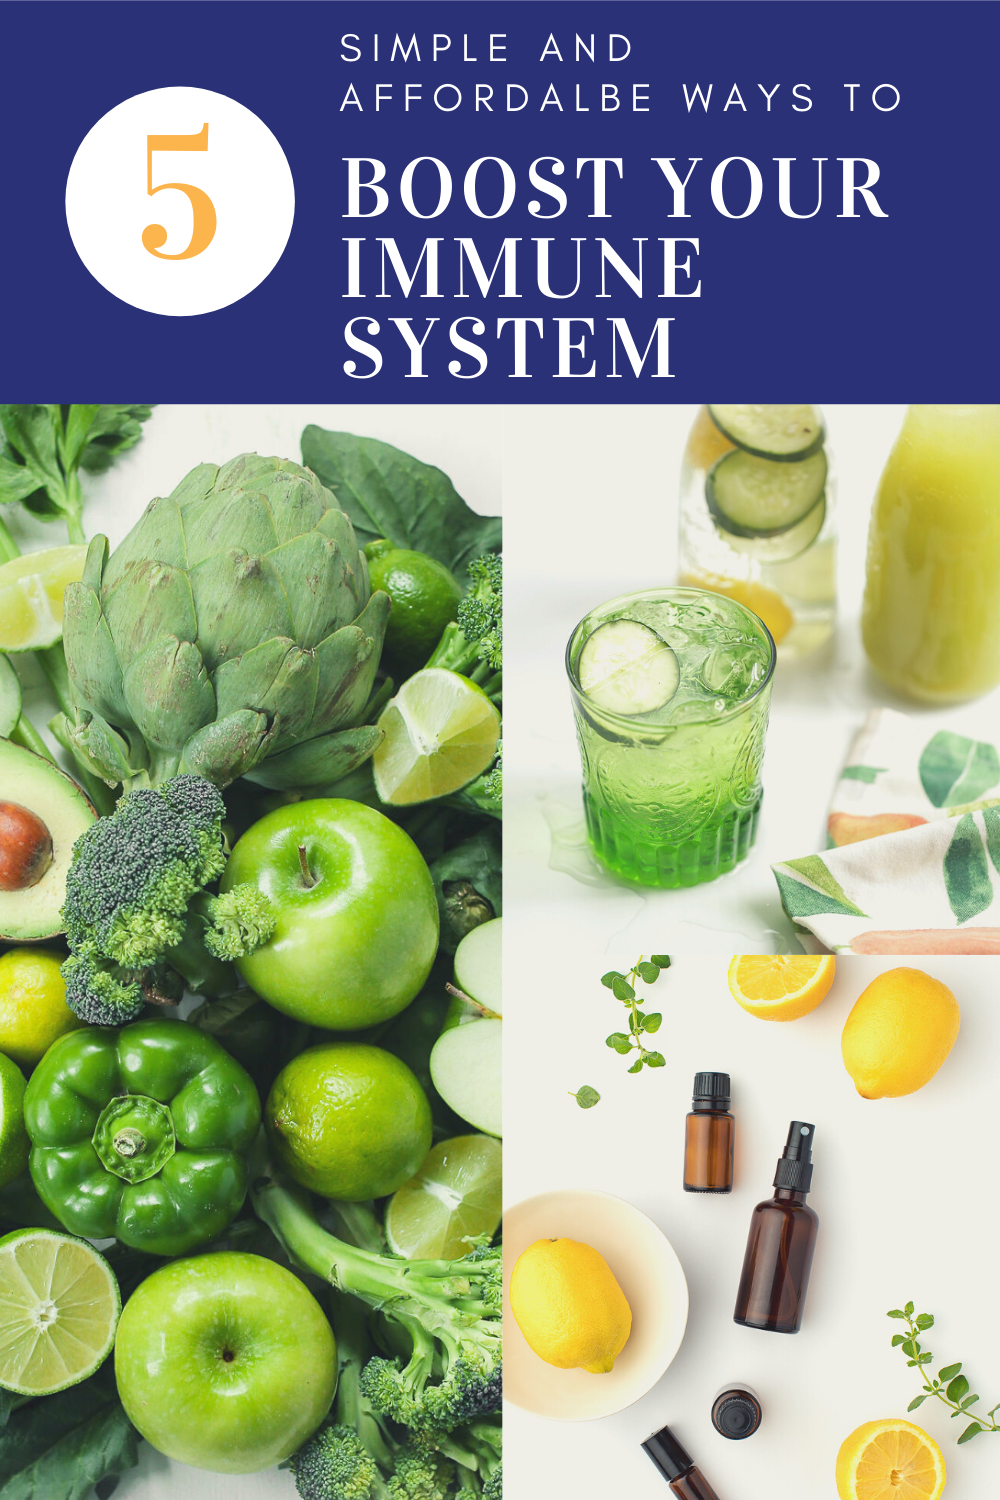 Boost Your Immune System to Stay Healthy